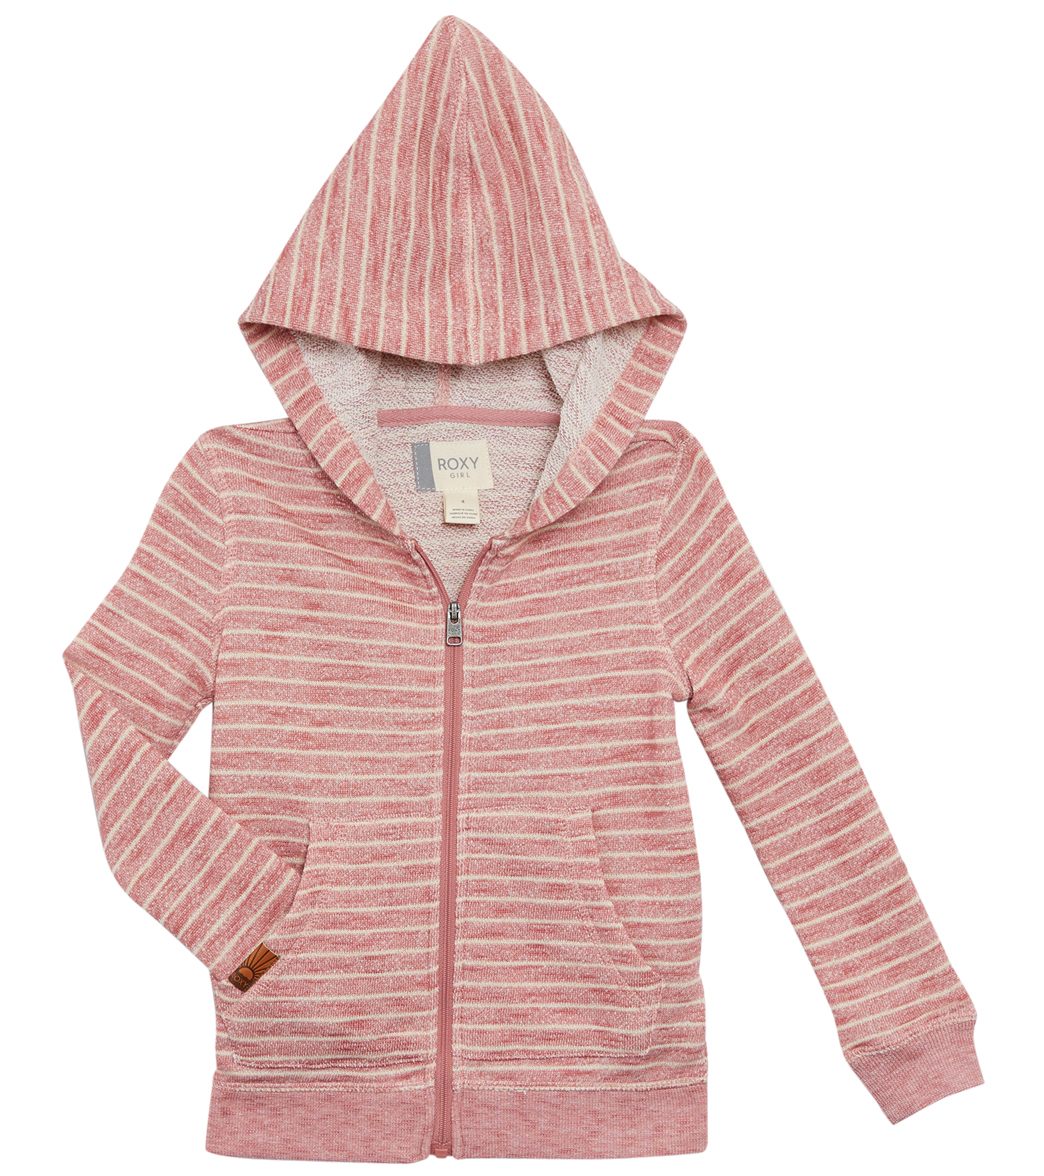 Roxy Girls' Lighter Day Zip-Up Hoodie - Ivory Belem Stripes 4 Cotton/Polyester - Swimoutlet.com